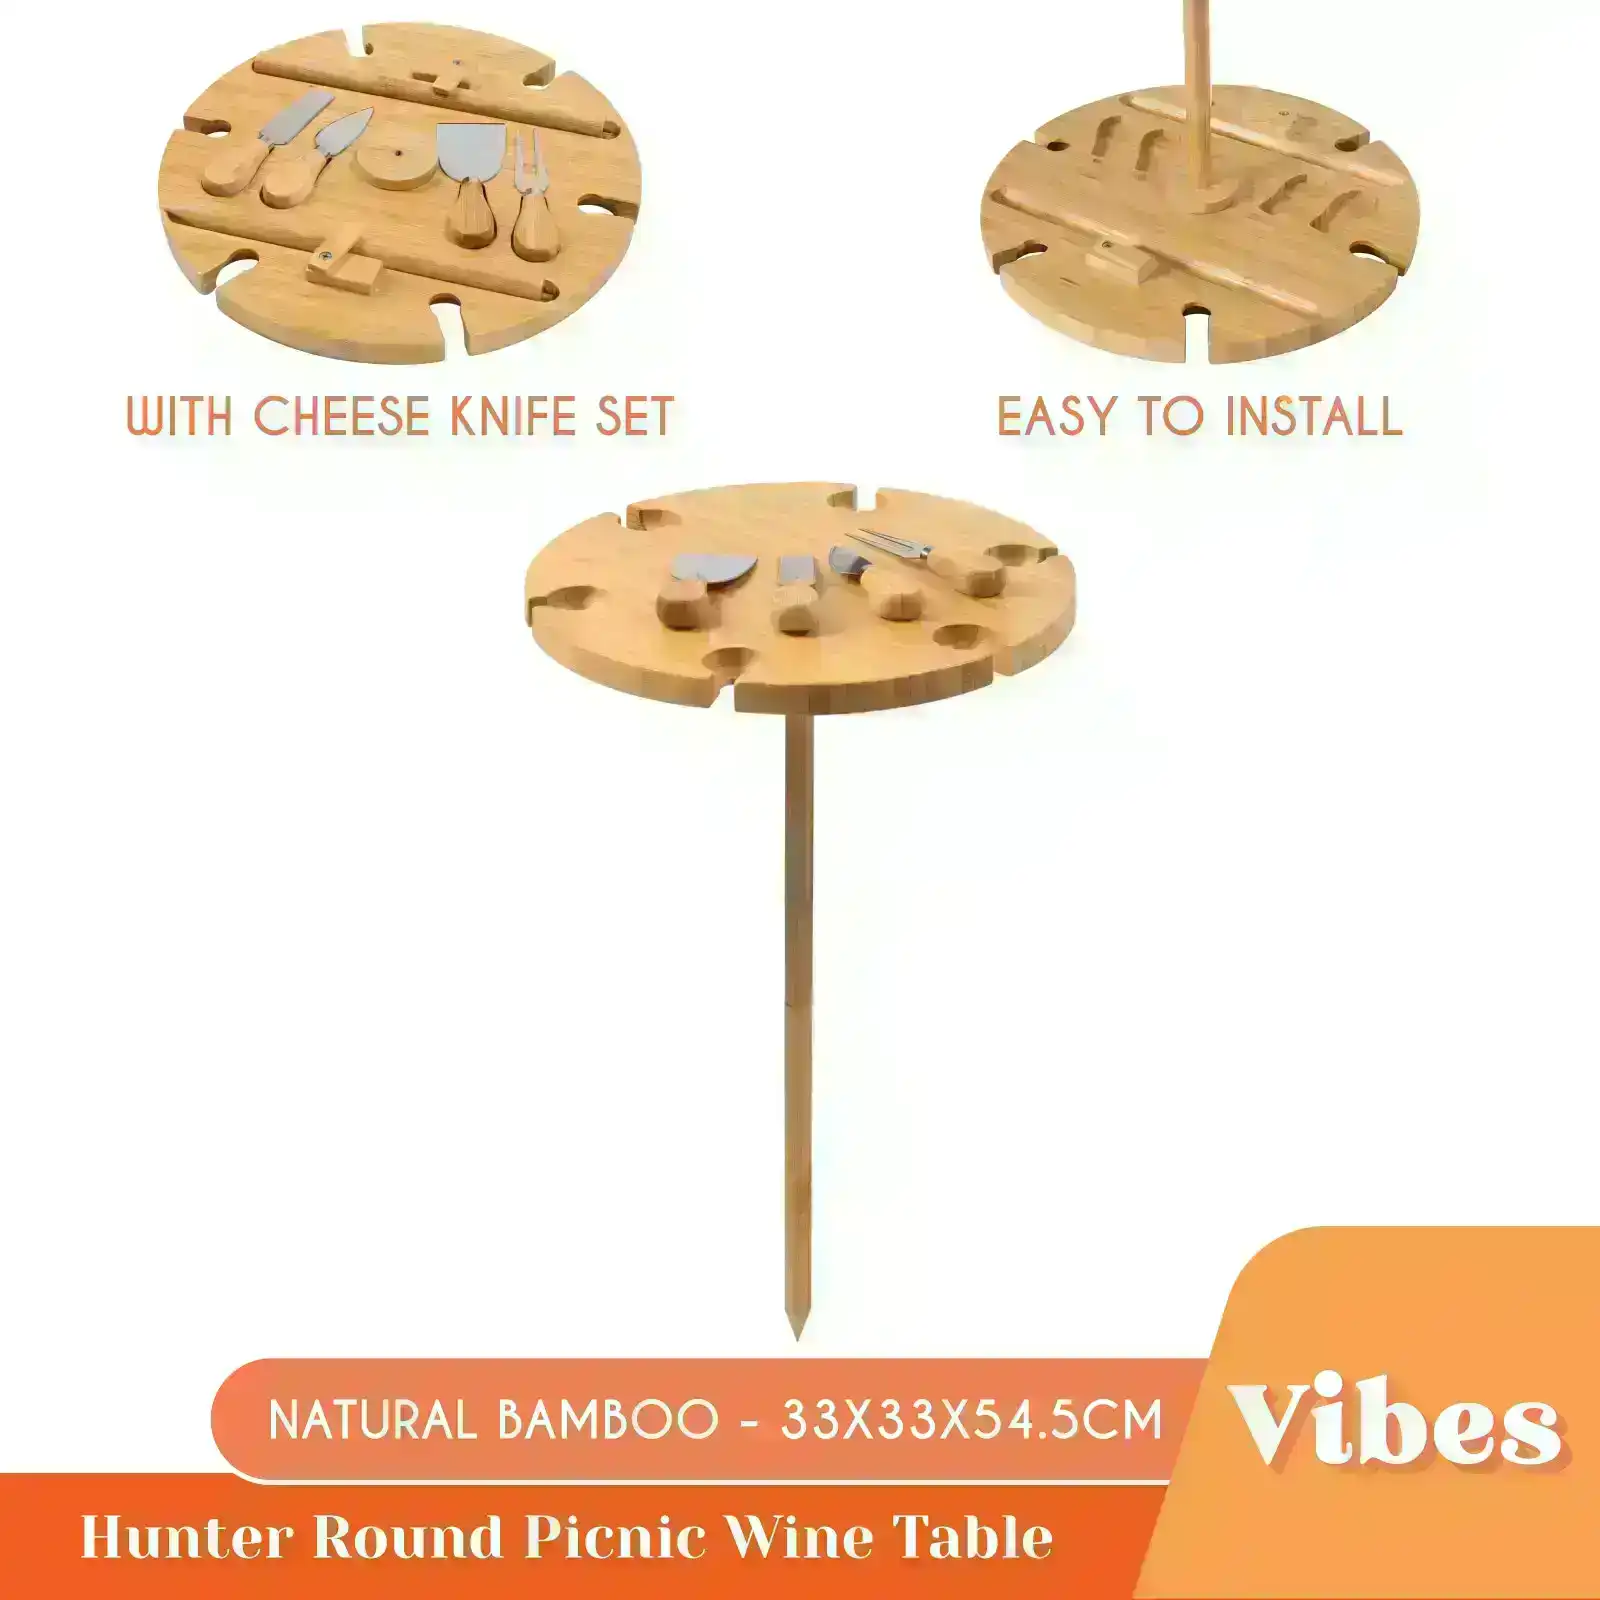 Vibes Hunter 6 Person Round Picnic Wine Table with Cheese Knife Set - Natural Bamboo 33x33x54.5cm